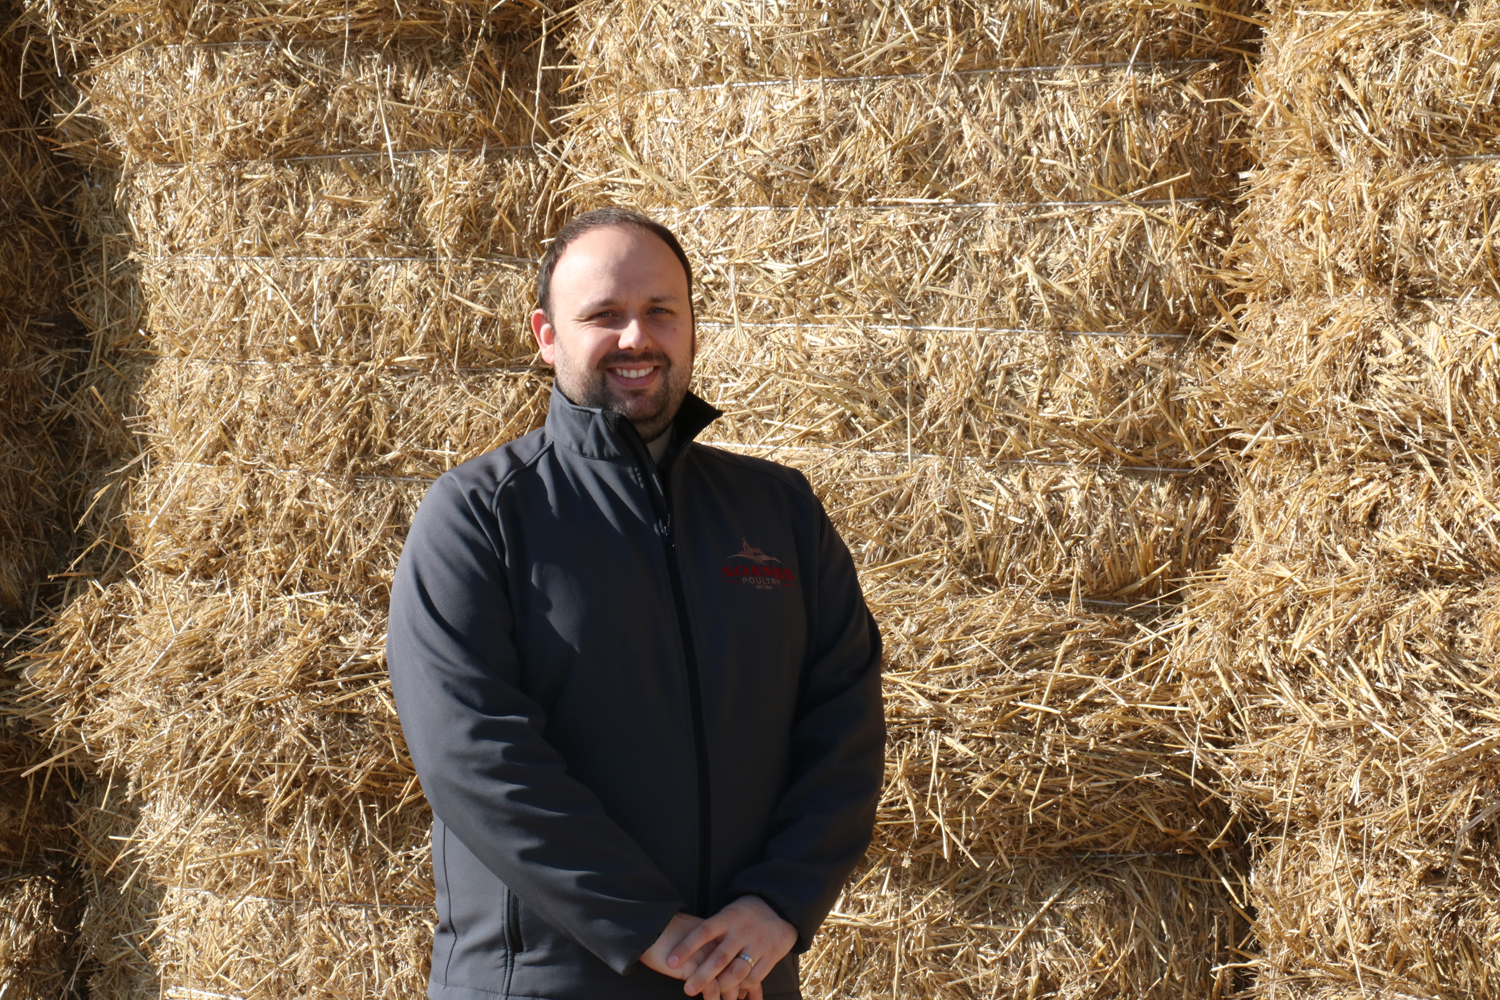 Ben Lee, head of sales and marketing at Soanes Poultry